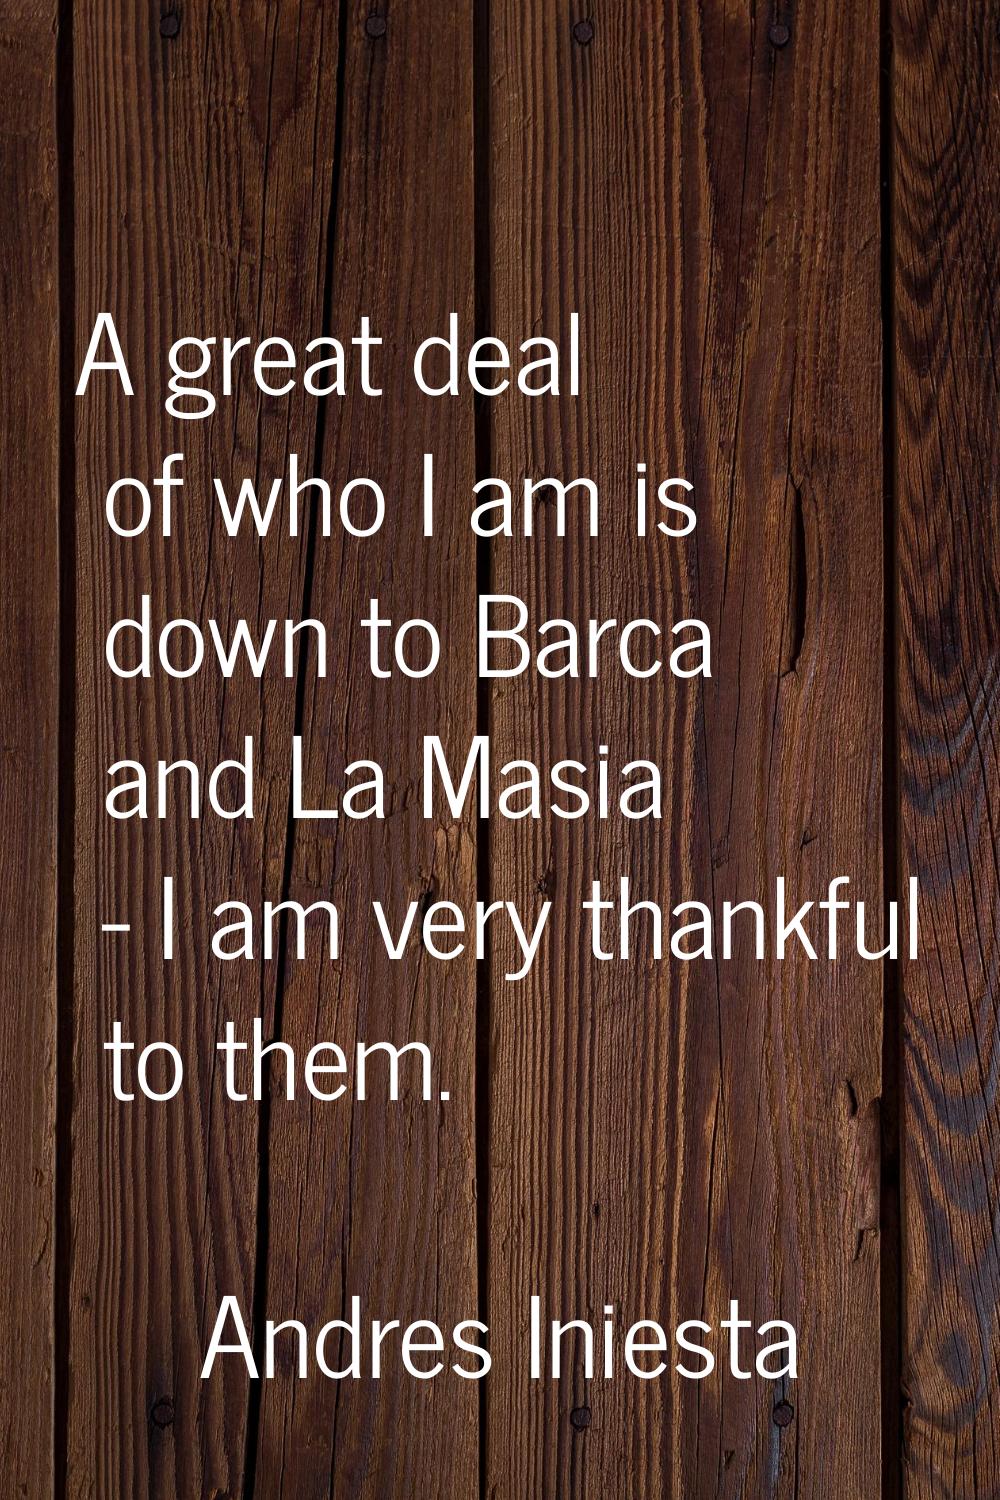 A great deal of who I am is down to Barca and La Masia - I am very thankful to them.